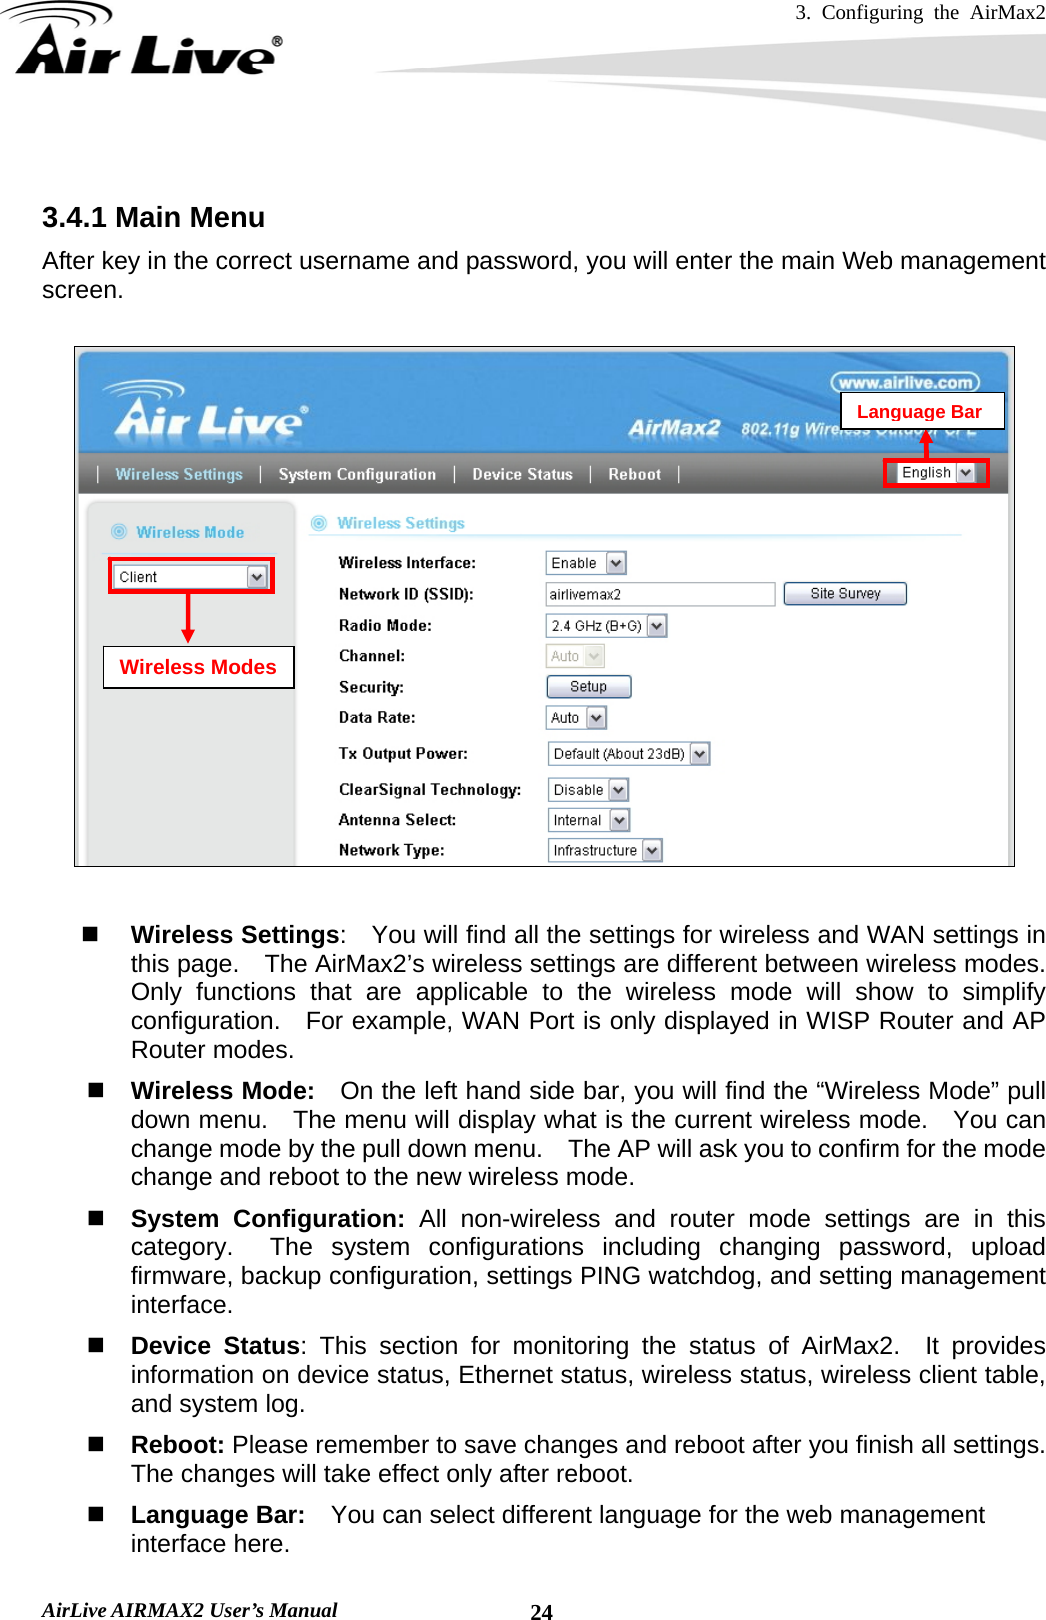 3. Configuring the AirMax2   AirLive AIRMAX2 User’s Manual  24 3.4.1 Main Menu After key in the correct username and password, you will enter the main Web management screen.       Wireless Settings:    You will find all the settings for wireless and WAN settings in this page.    The AirMax2’s wireless settings are different between wireless modes.   Only functions that are applicable to the wireless mode will show to simplify configuration.  For example, WAN Port is only displayed in WISP Router and AP Router modes.    Wireless Mode:    On the left hand side bar, you will find the “Wireless Mode” pull down menu.    The menu will display what is the current wireless mode.    You can change mode by the pull down menu.    The AP will ask you to confirm for the mode change and reboot to the new wireless mode.  System Configuration: All non-wireless and router mode settings are in this category.  The system configurations including changing password, upload firmware, backup configuration, settings PING watchdog, and setting management interface.    Device Status: This section for monitoring the status of AirMax2.  It provides information on device status, Ethernet status, wireless status, wireless client table, and system log.  Reboot: Please remember to save changes and reboot after you finish all settings.   The changes will take effect only after reboot.  Language Bar:    You can select different language for the web management interface here.     Wireless Modes Language Bar